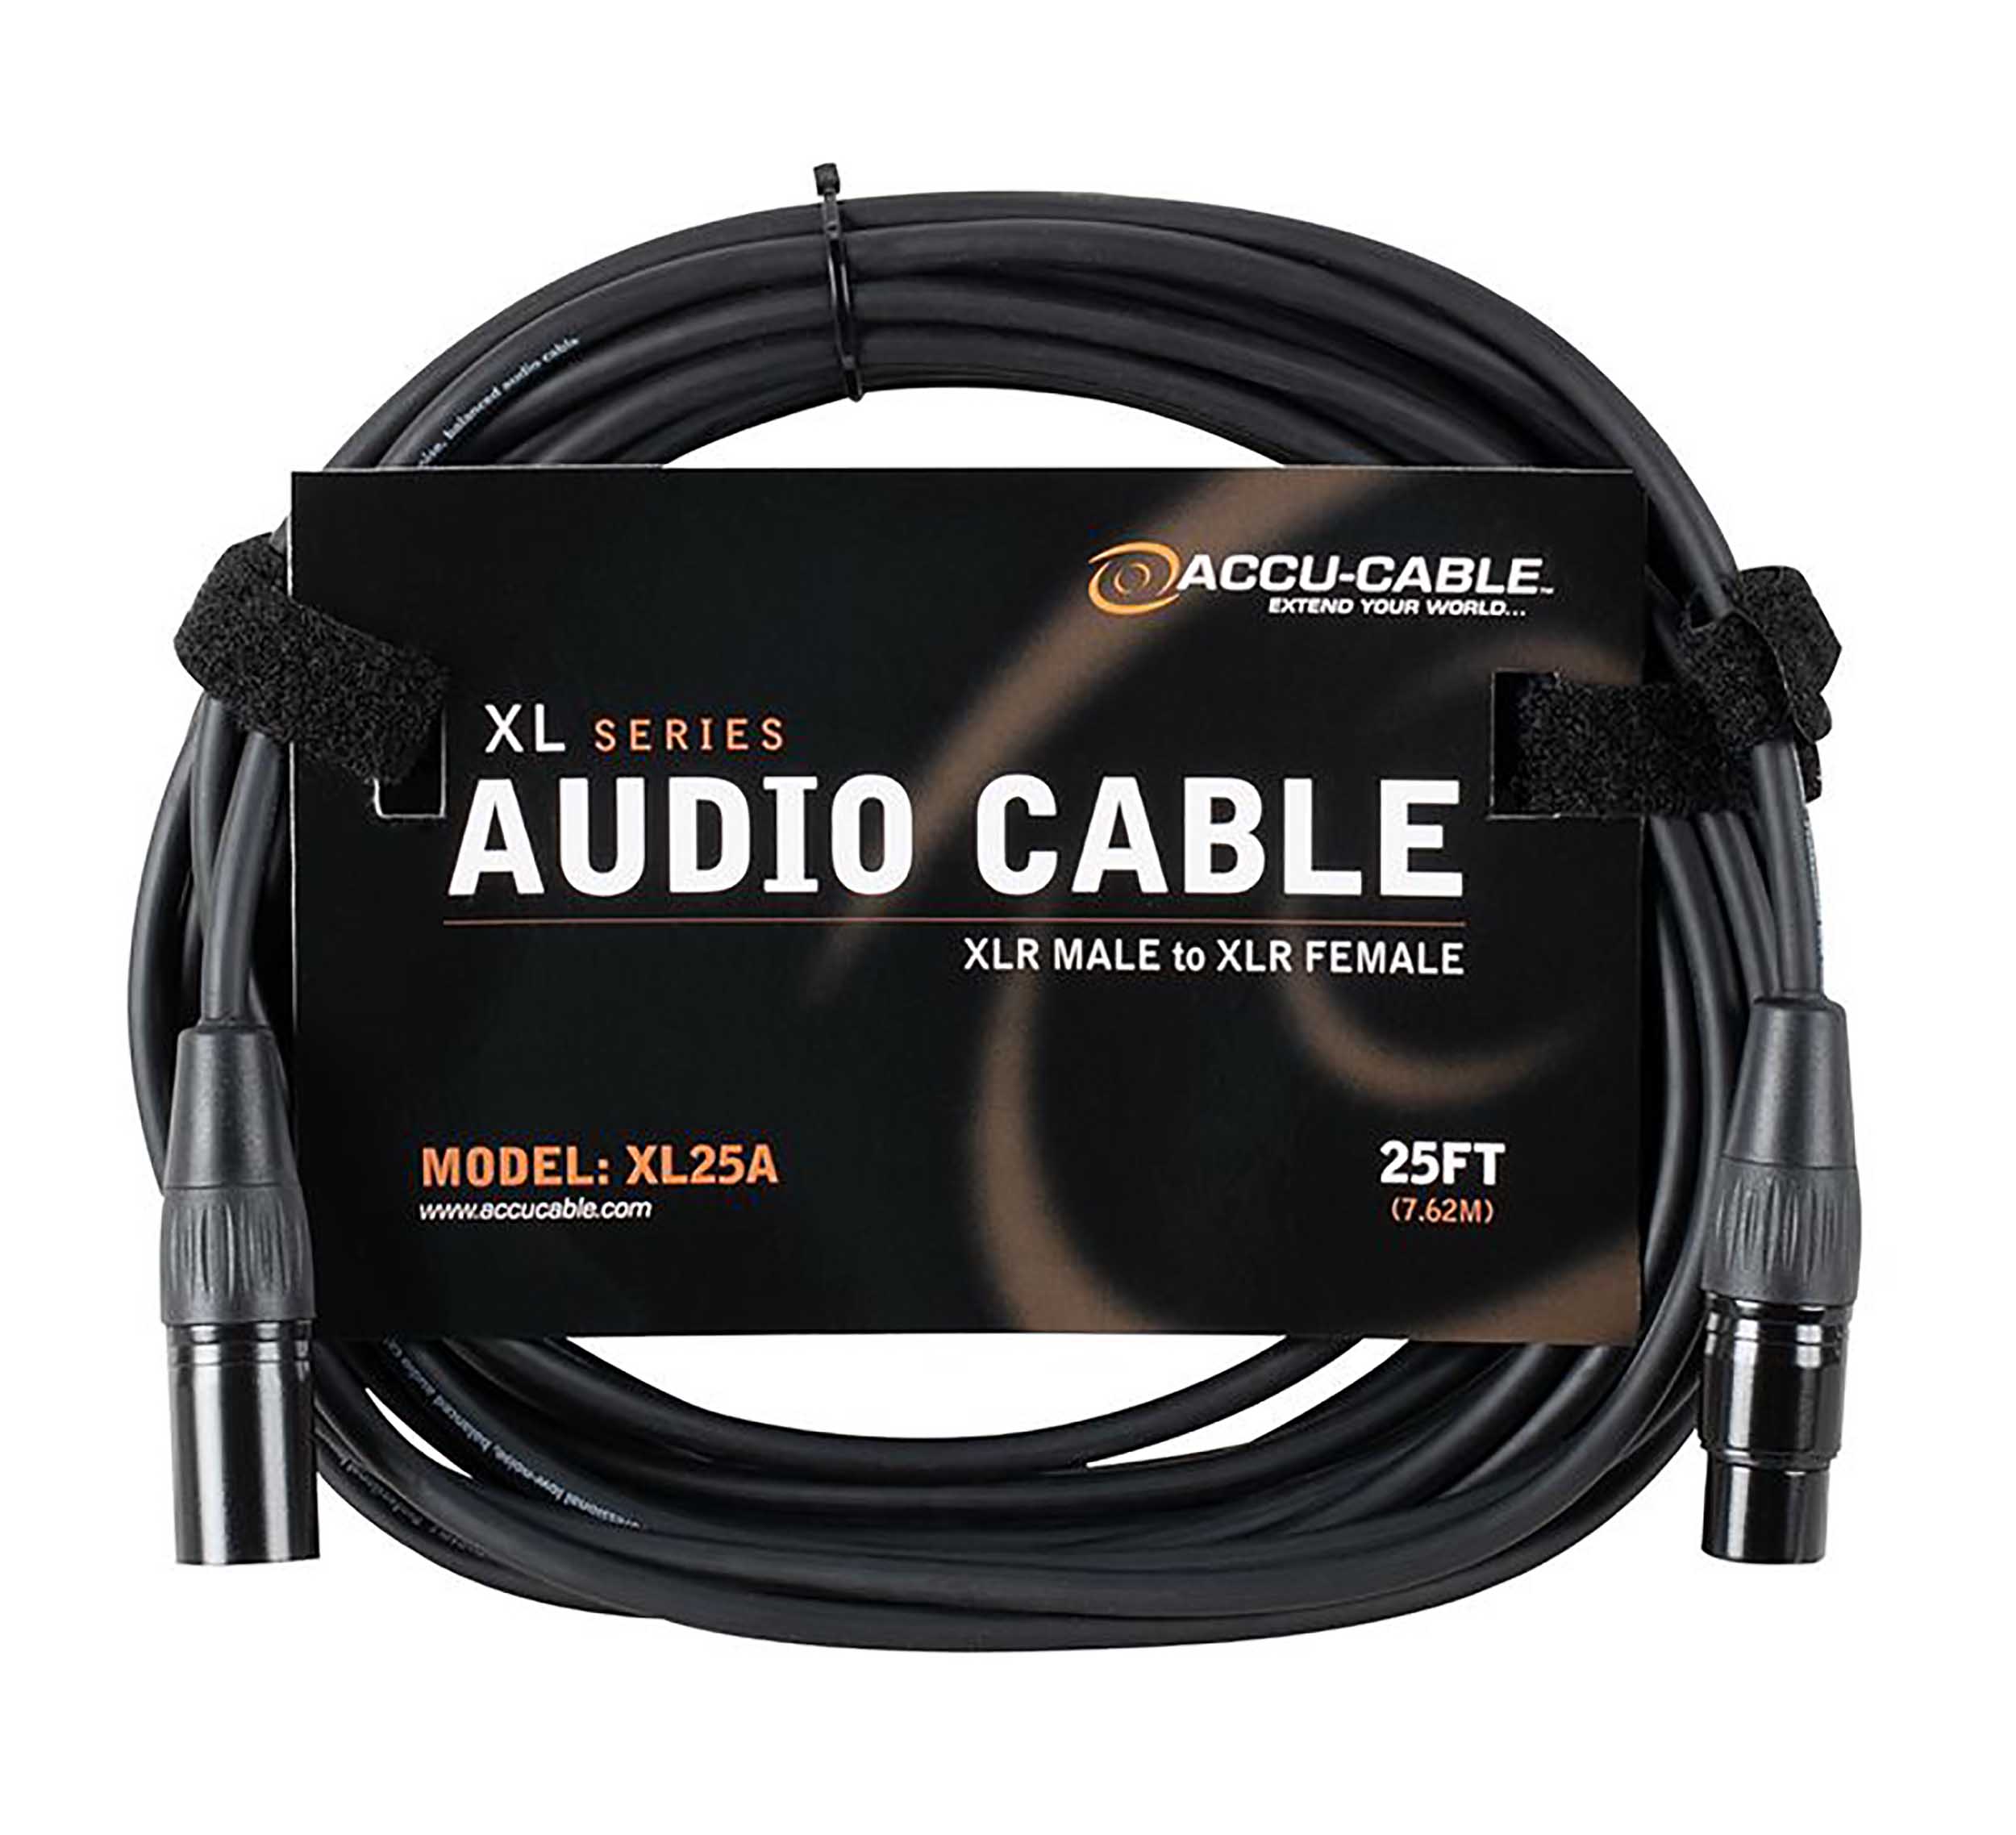 Accu-Cable XL-VAR, XLR Male to XLR Female Balanced Audio Cable by Accu Cable